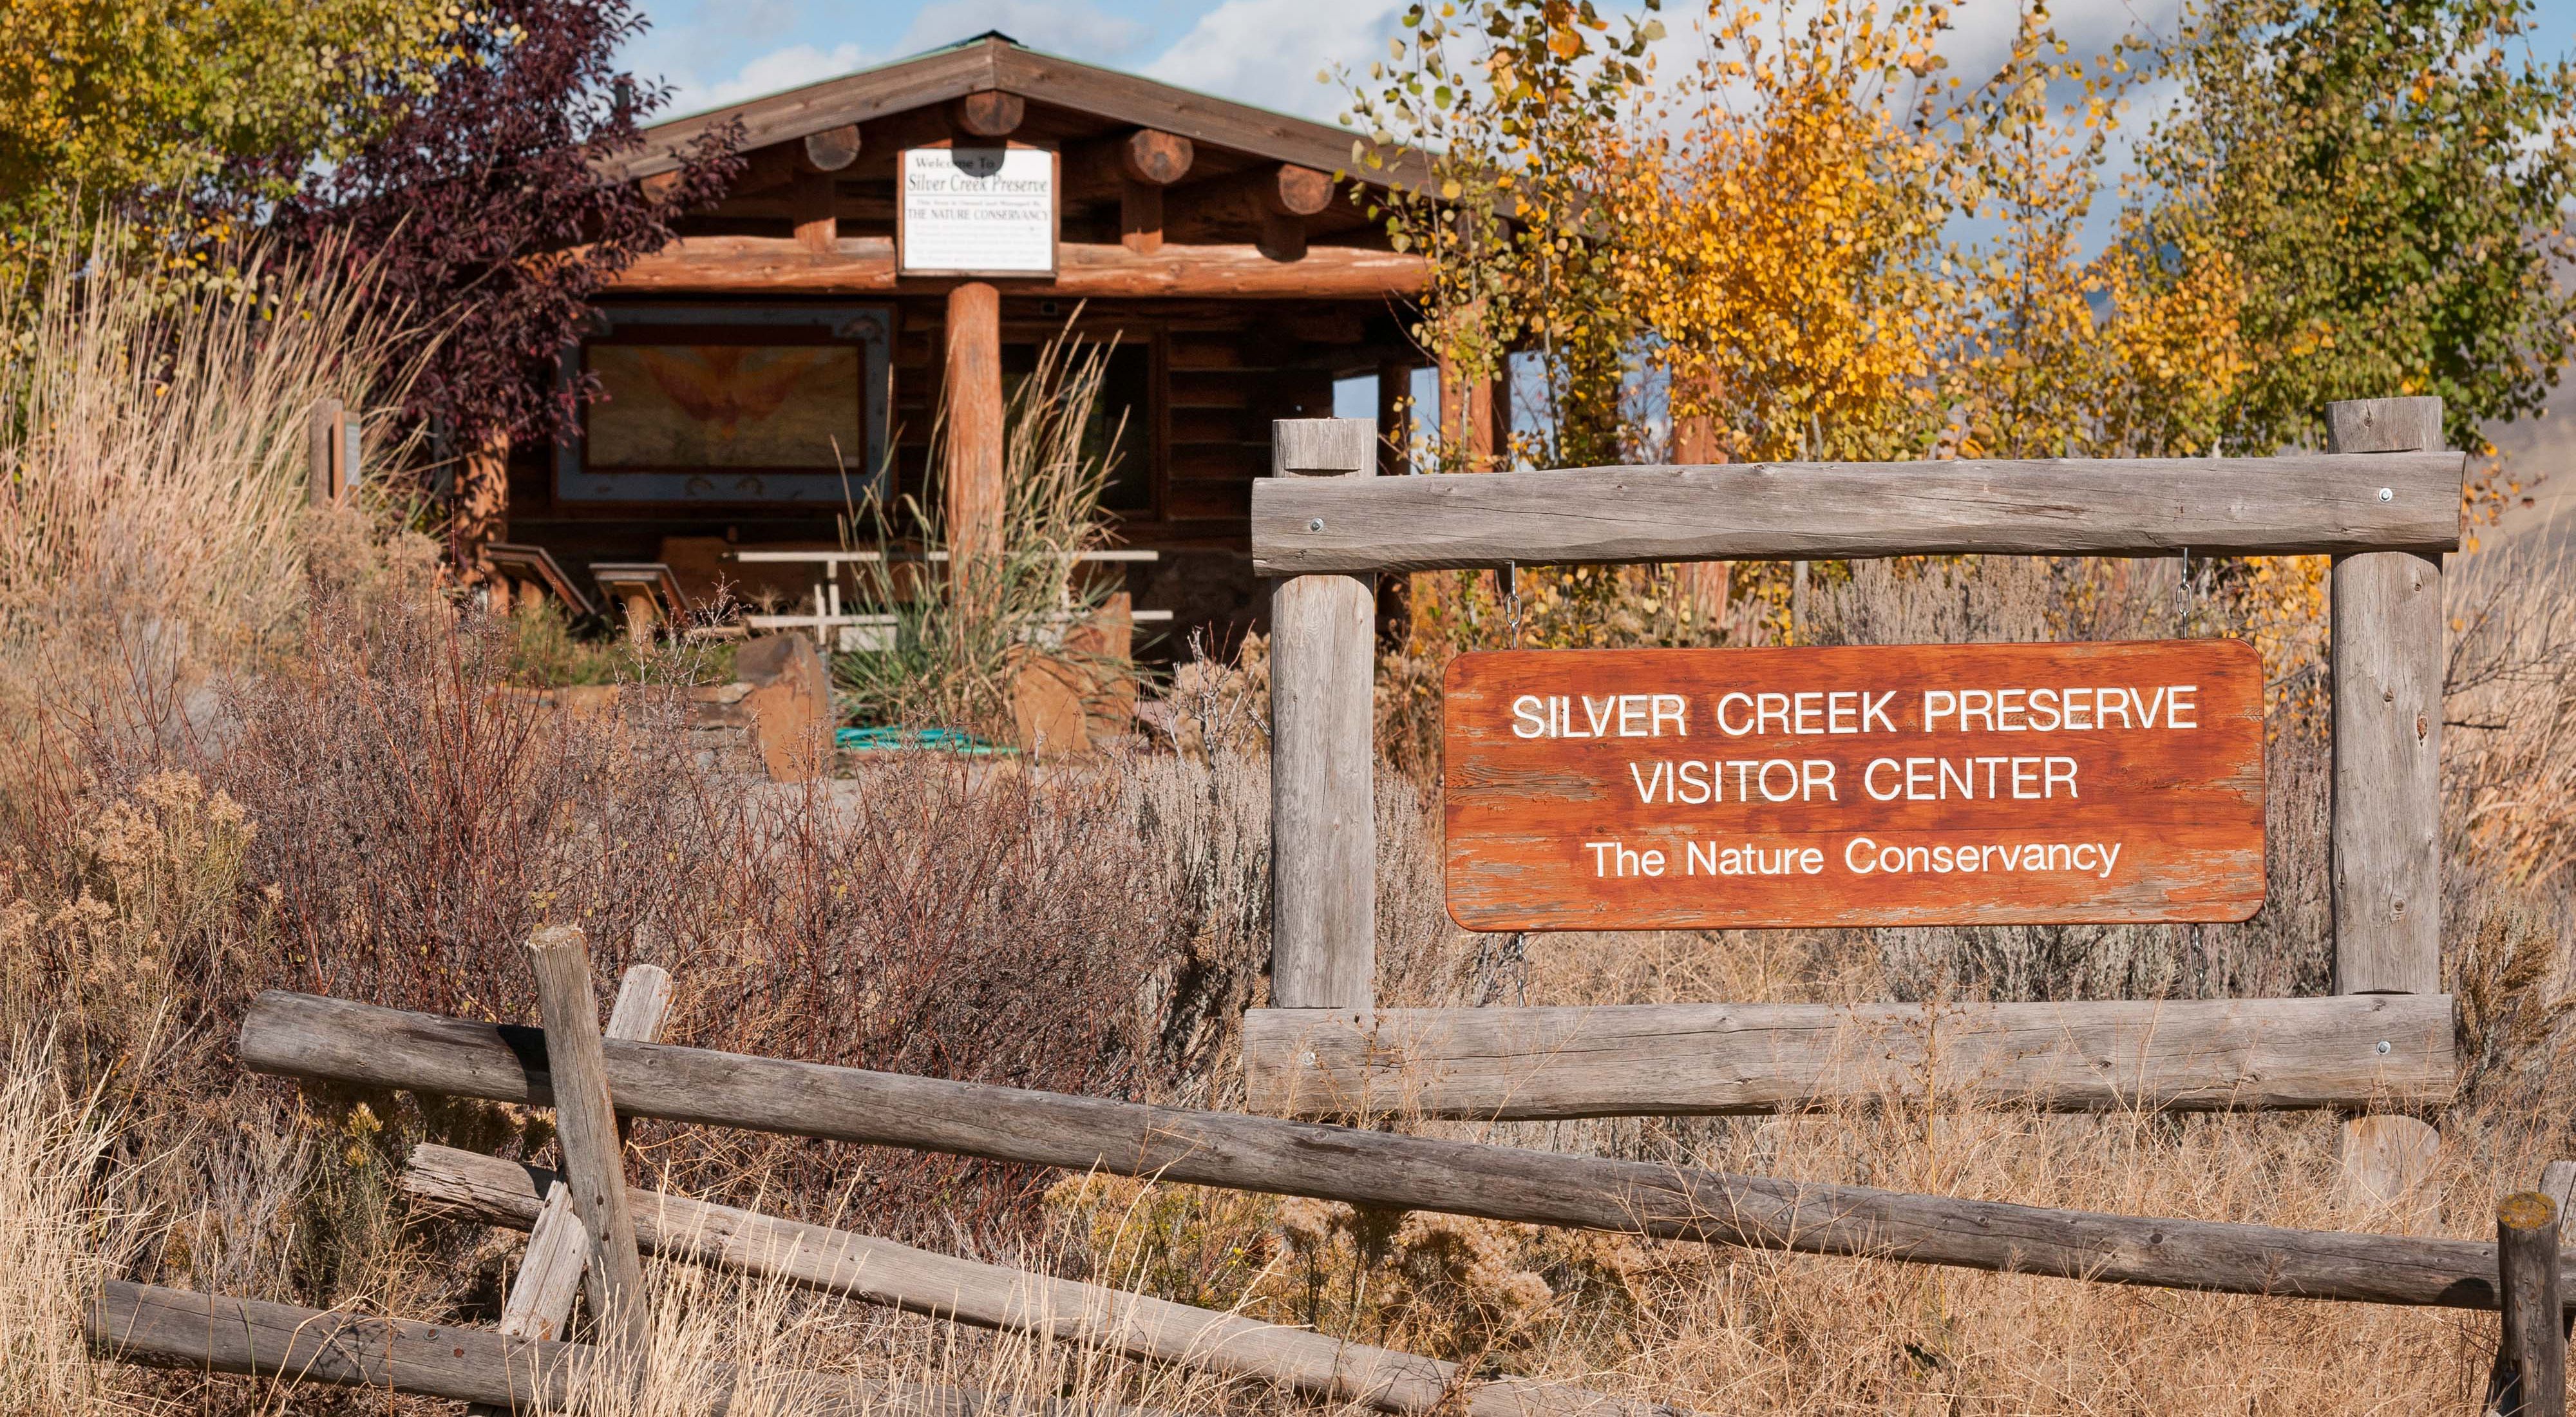 Photo of a welcome sign for visitor center with building in the background.